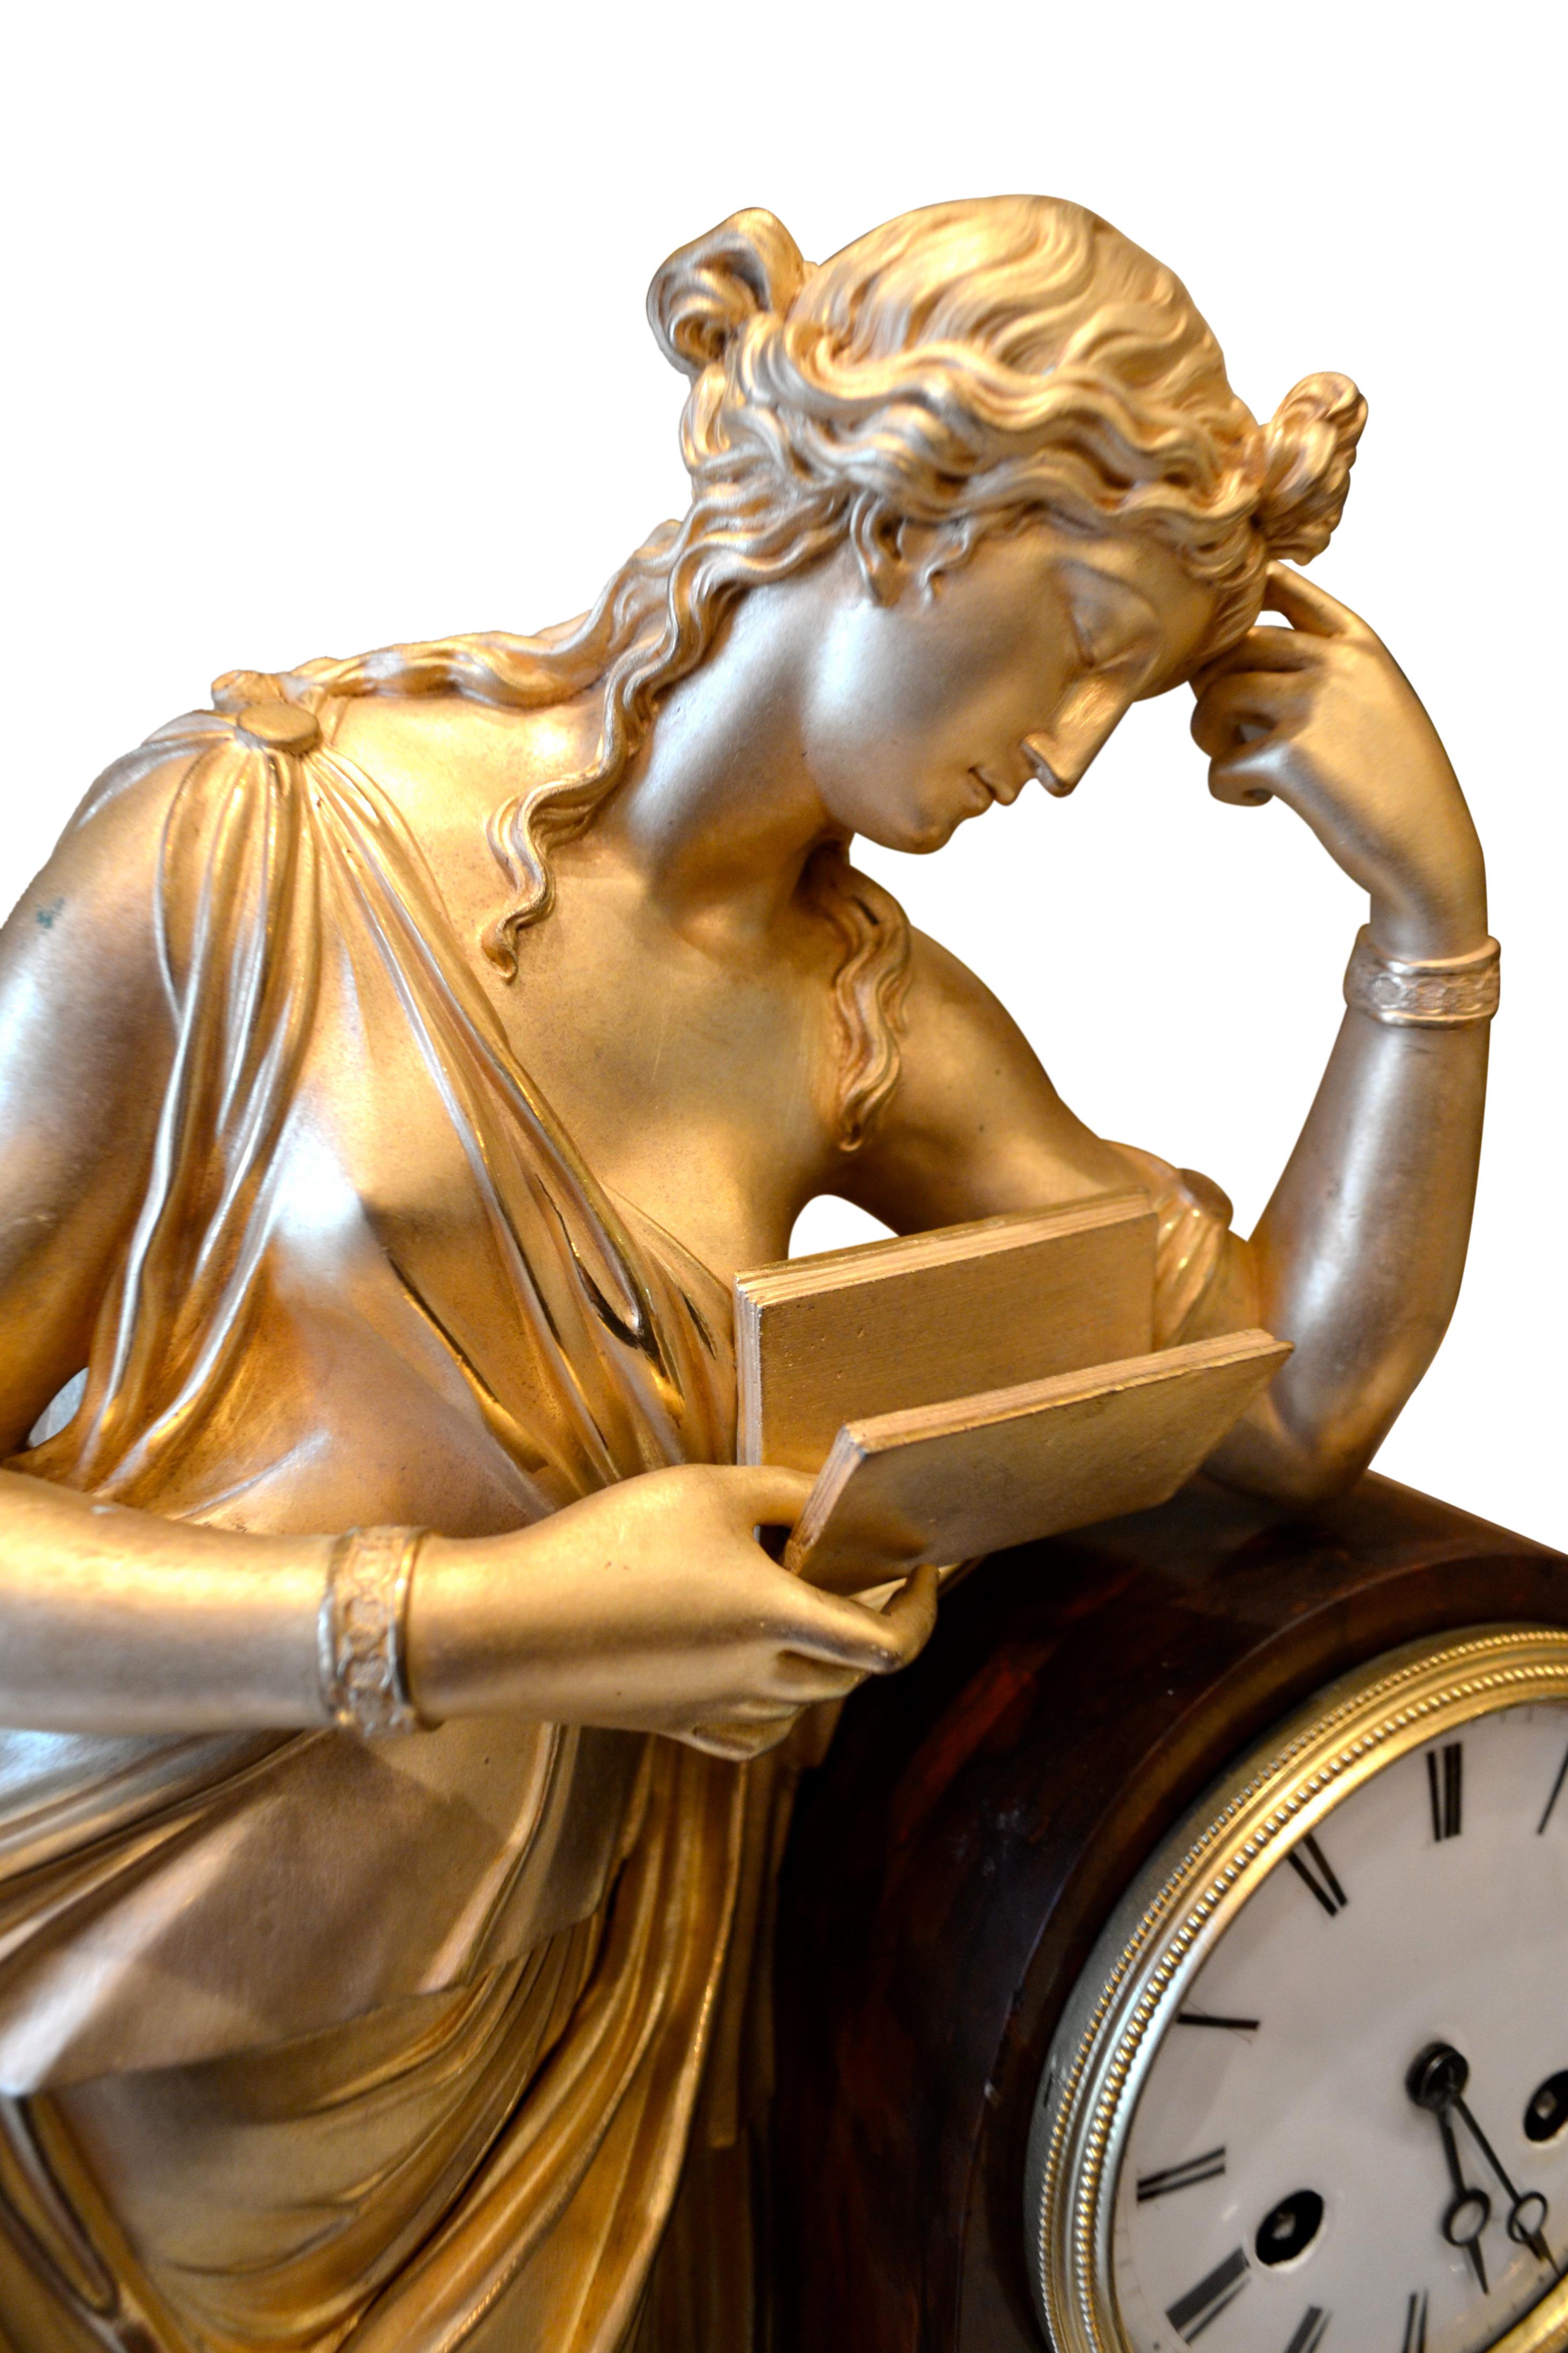 A French Louis Philippe allegorical gilt bronze and marble mantle clock depicting Clio, The Greek Muse of History. The standing figure of a gilded Clio is shown leaning against the clock plinth reading a book with one hand, the other hand bent to